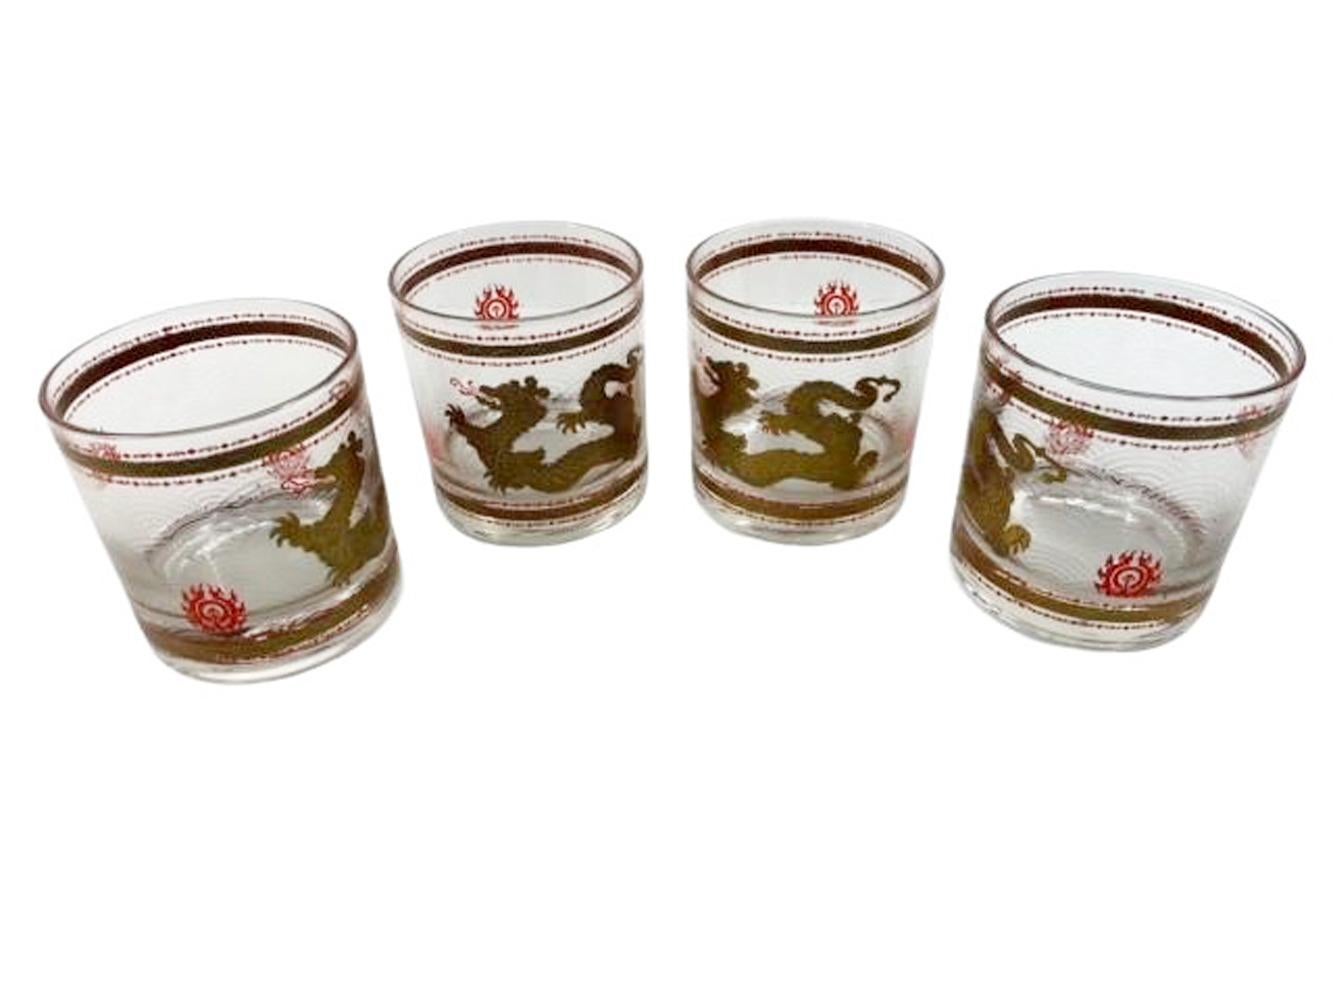 Four vintage rocks glasses by Cera with a Golden Dragon chasing the 